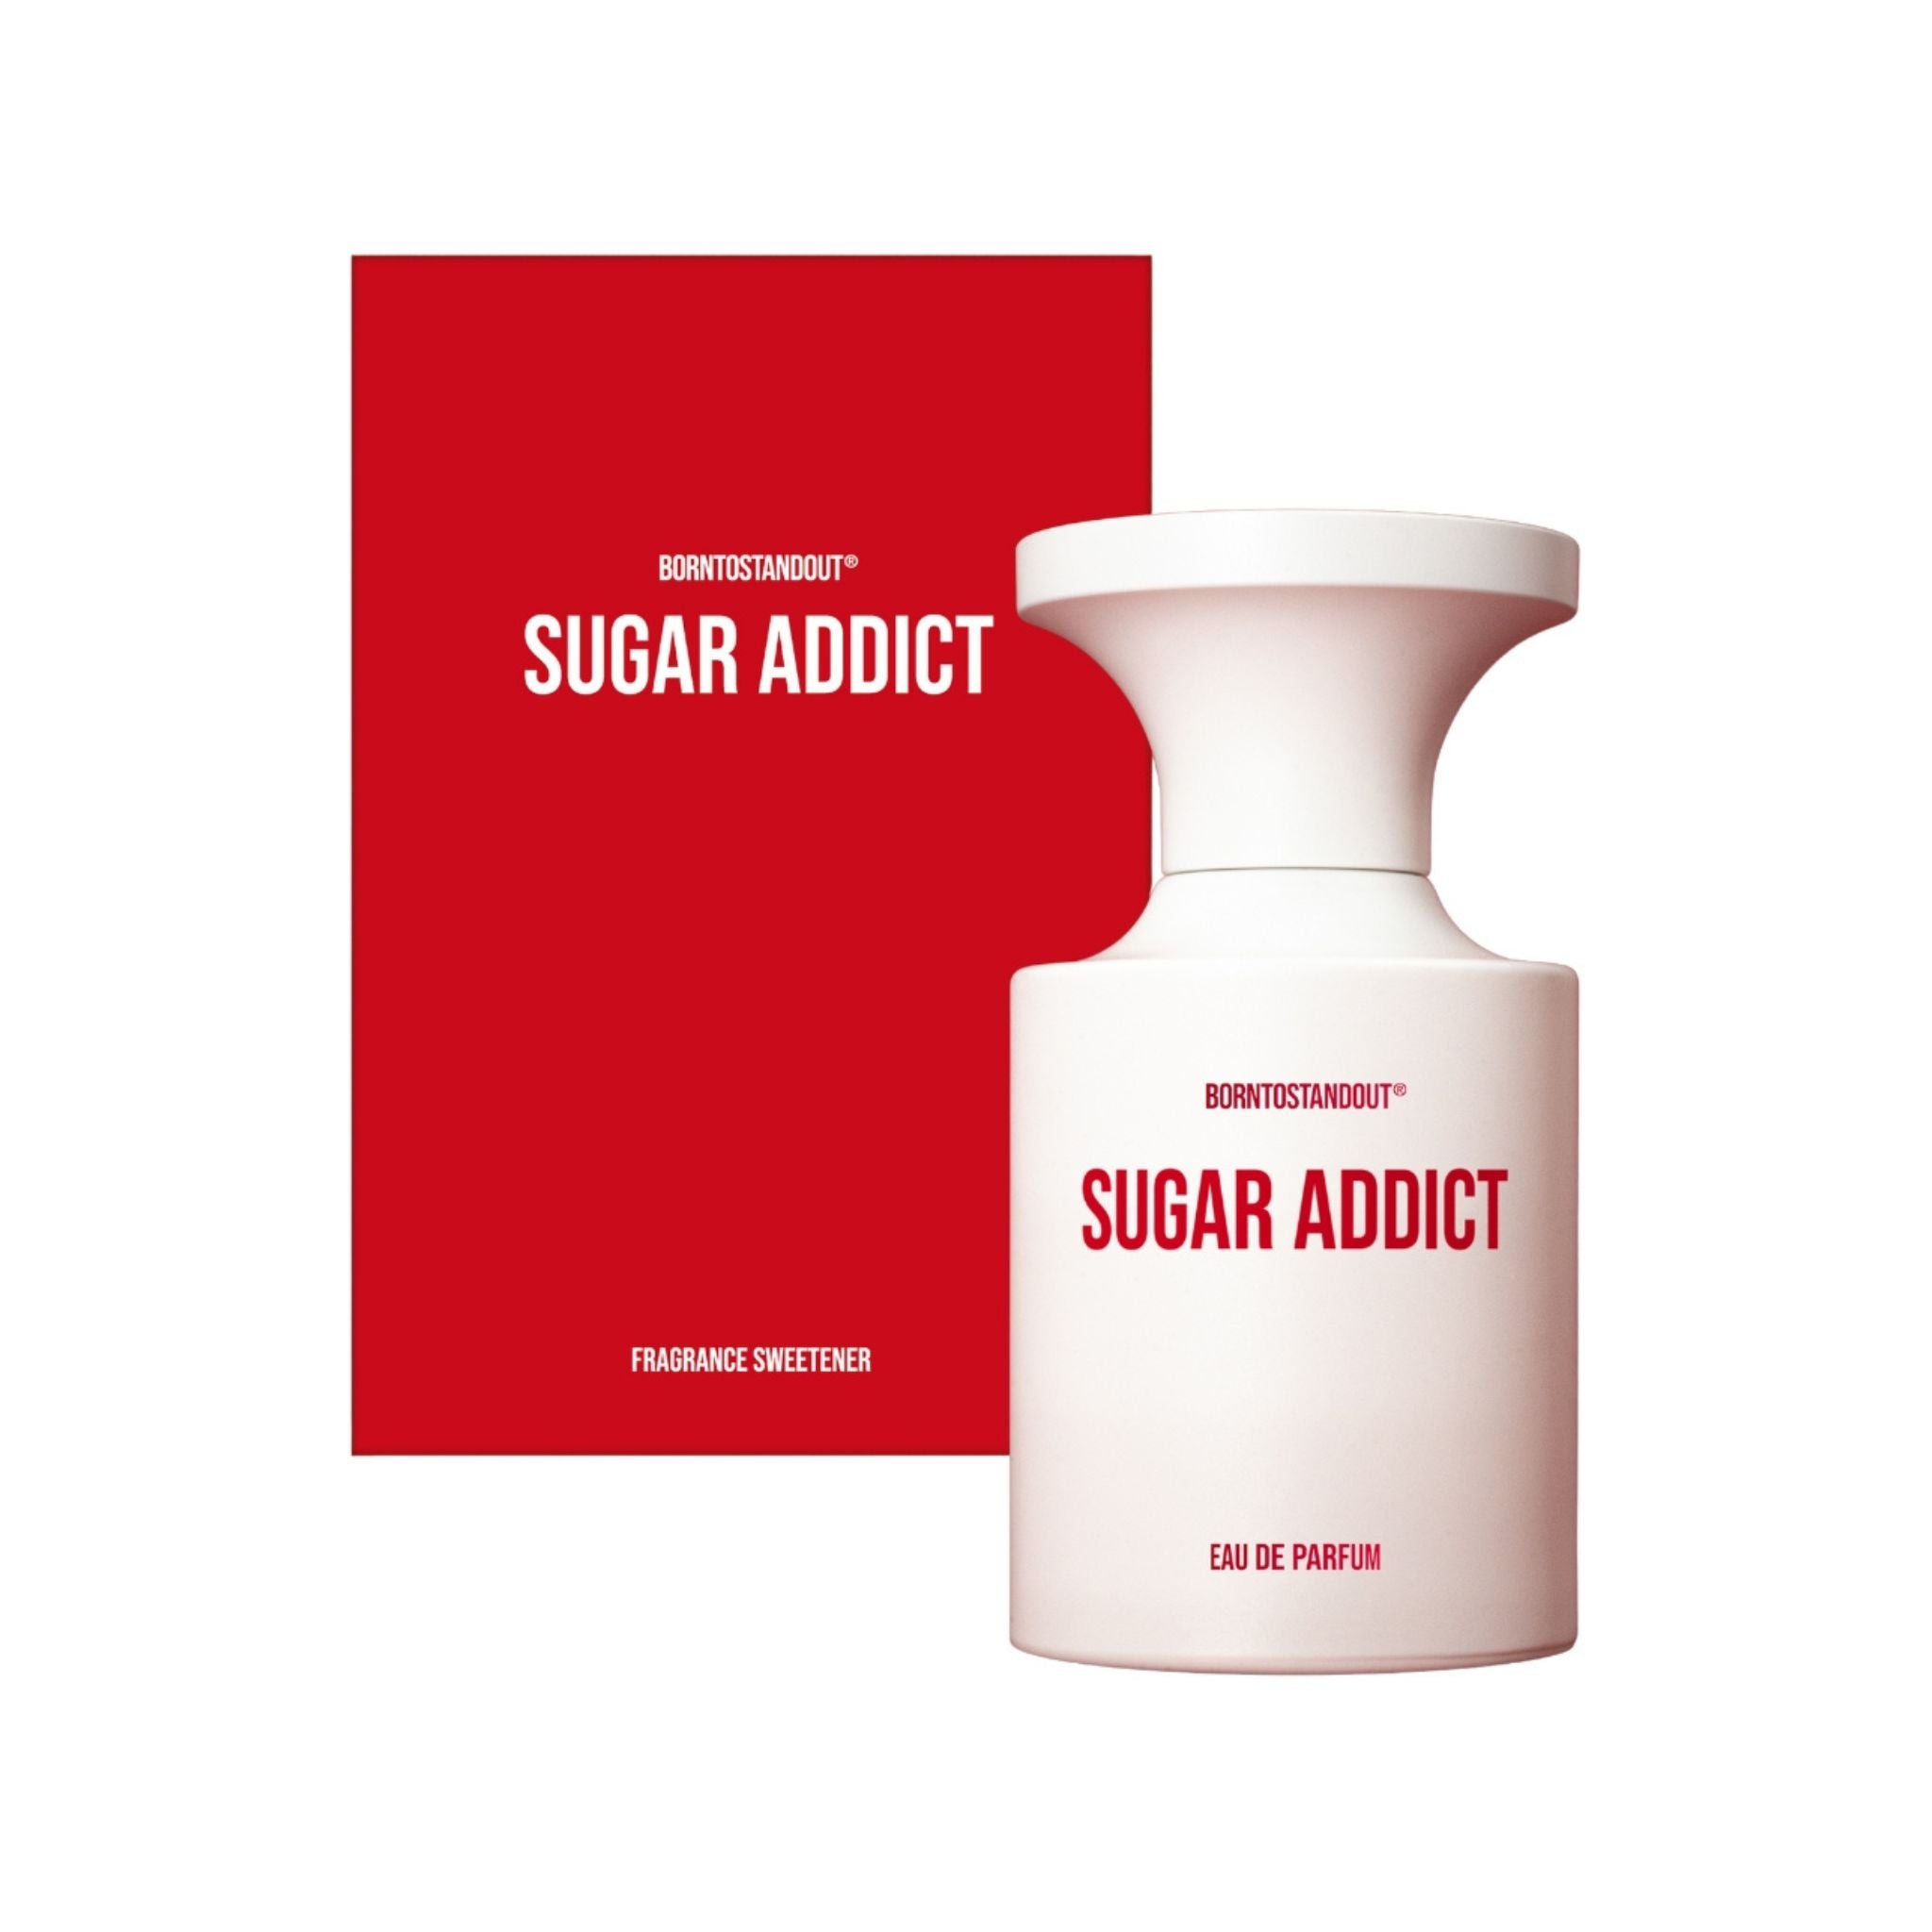 Born to stand out Sugar Addict Packaging